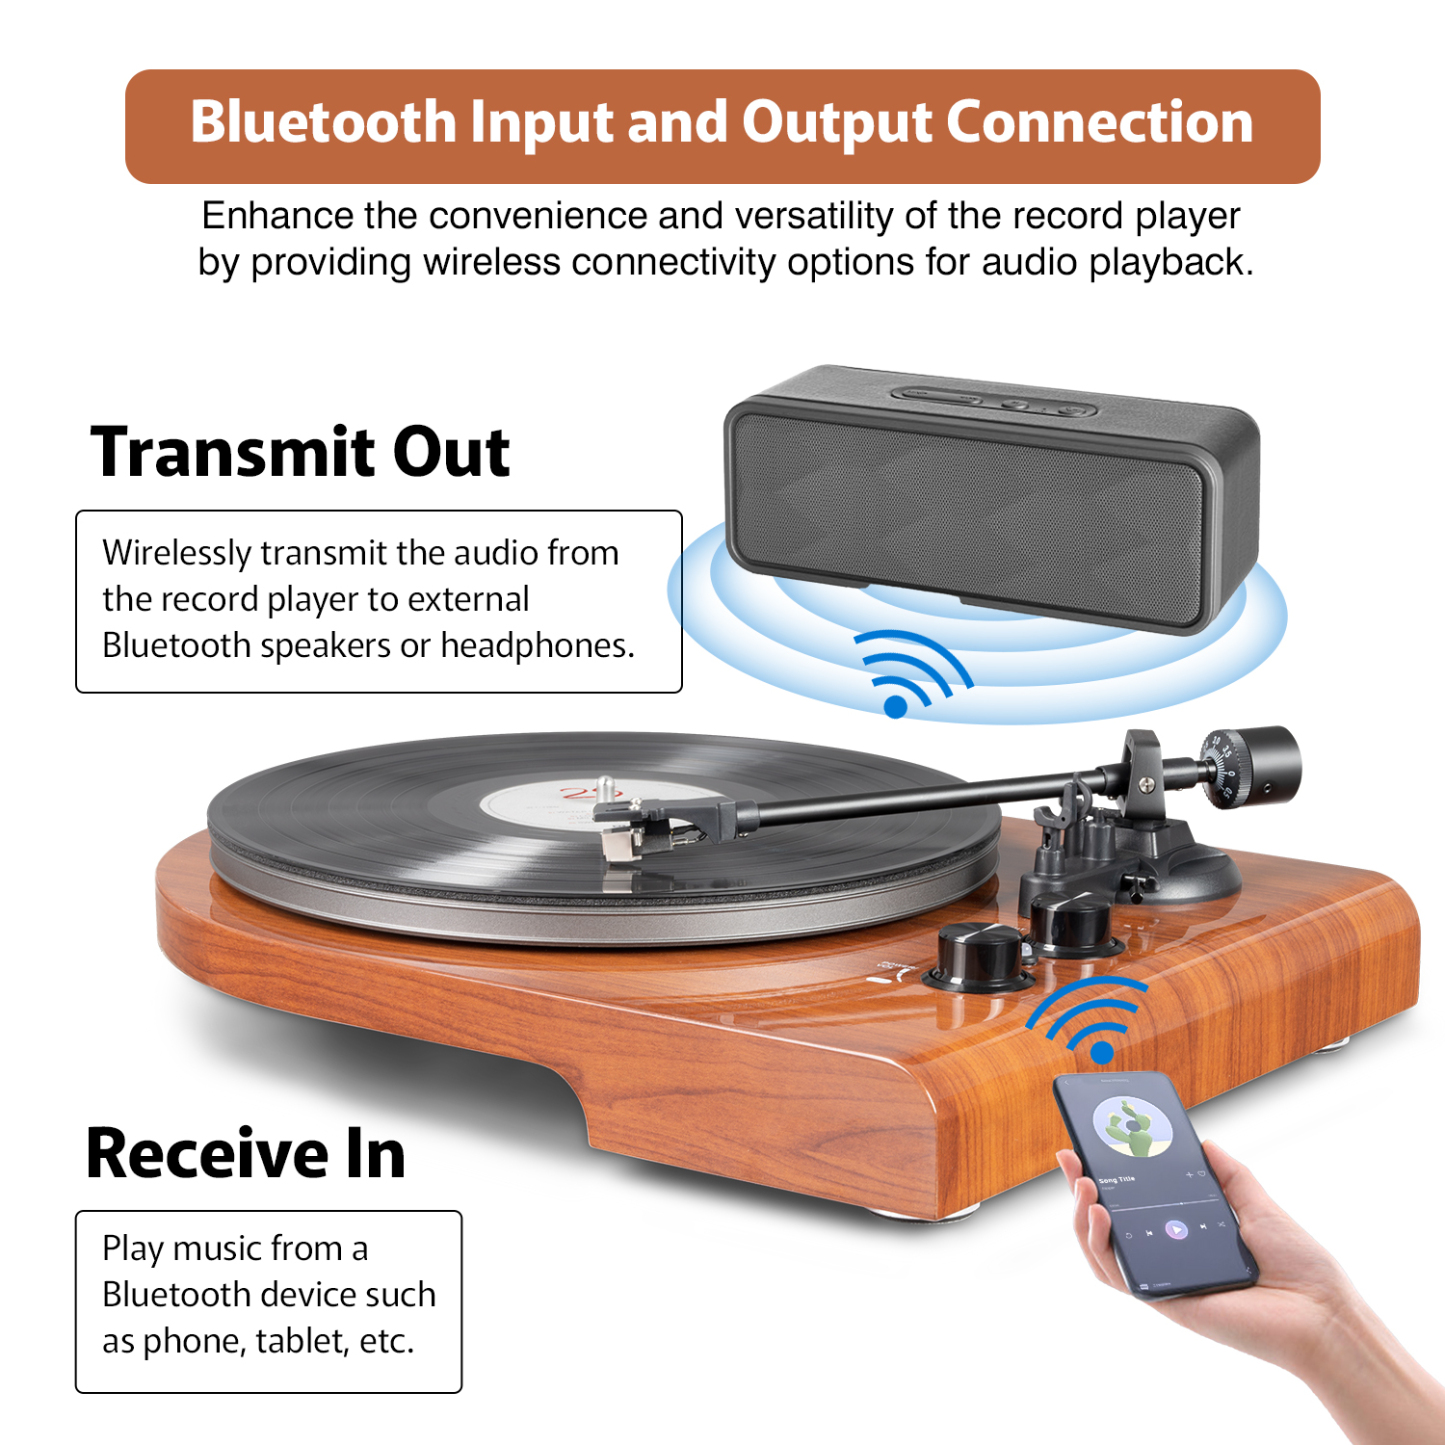 High Fidelity Bluetooth Vinyl Turntable with Unique Design